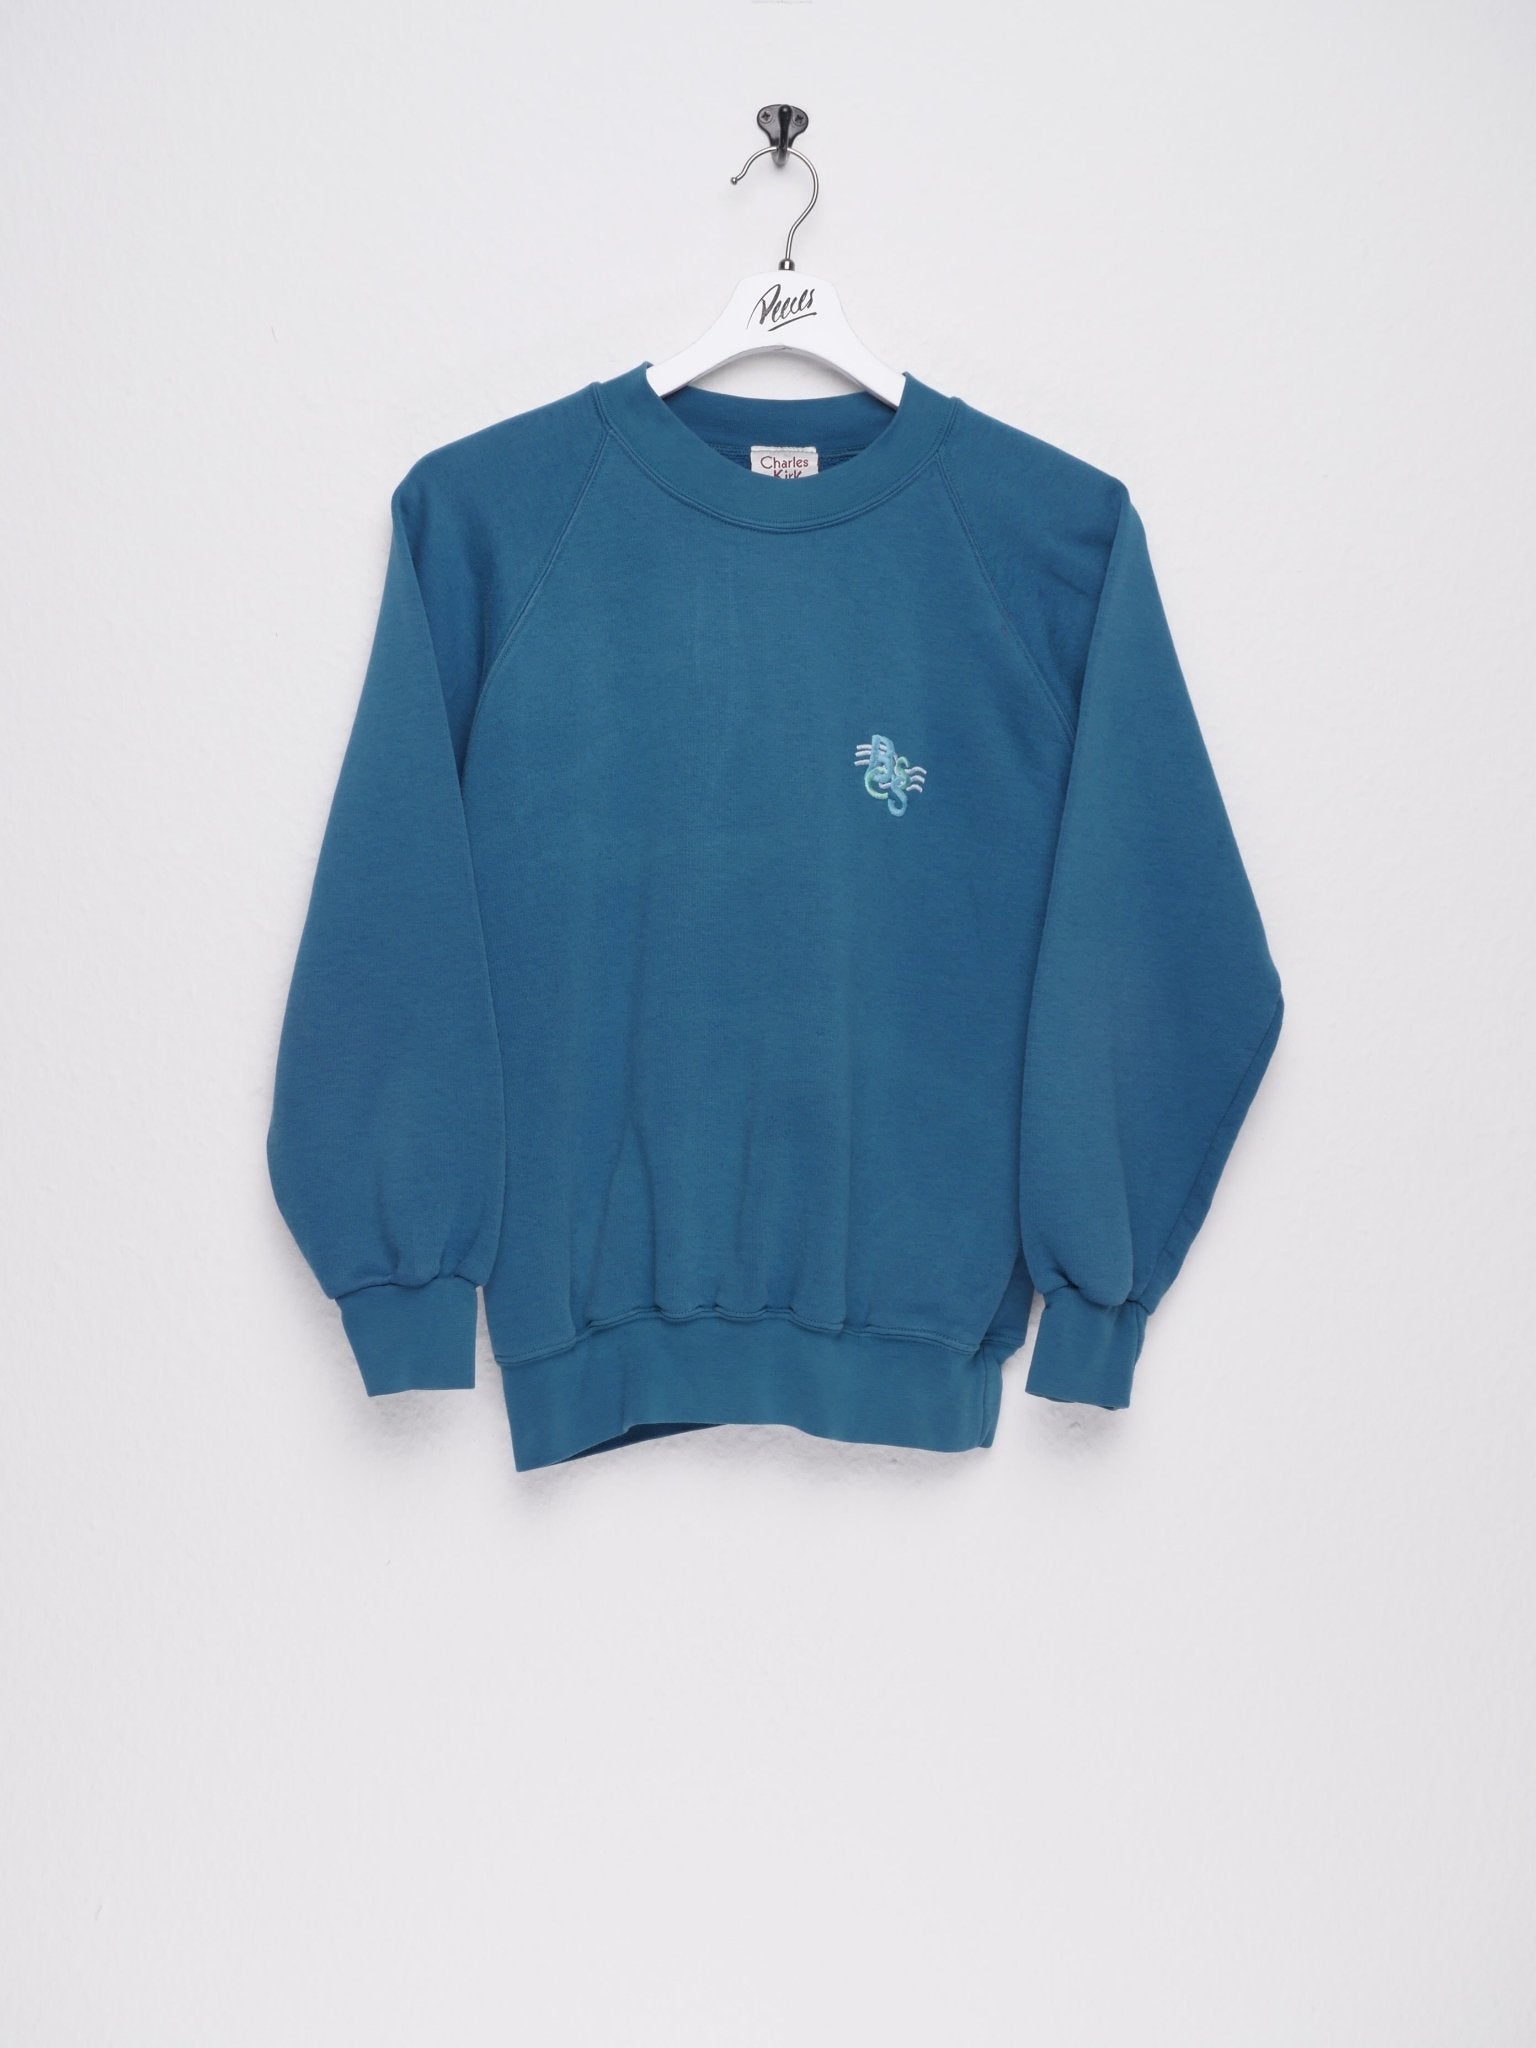 embroidered turquoise basic Sweater - Peeces